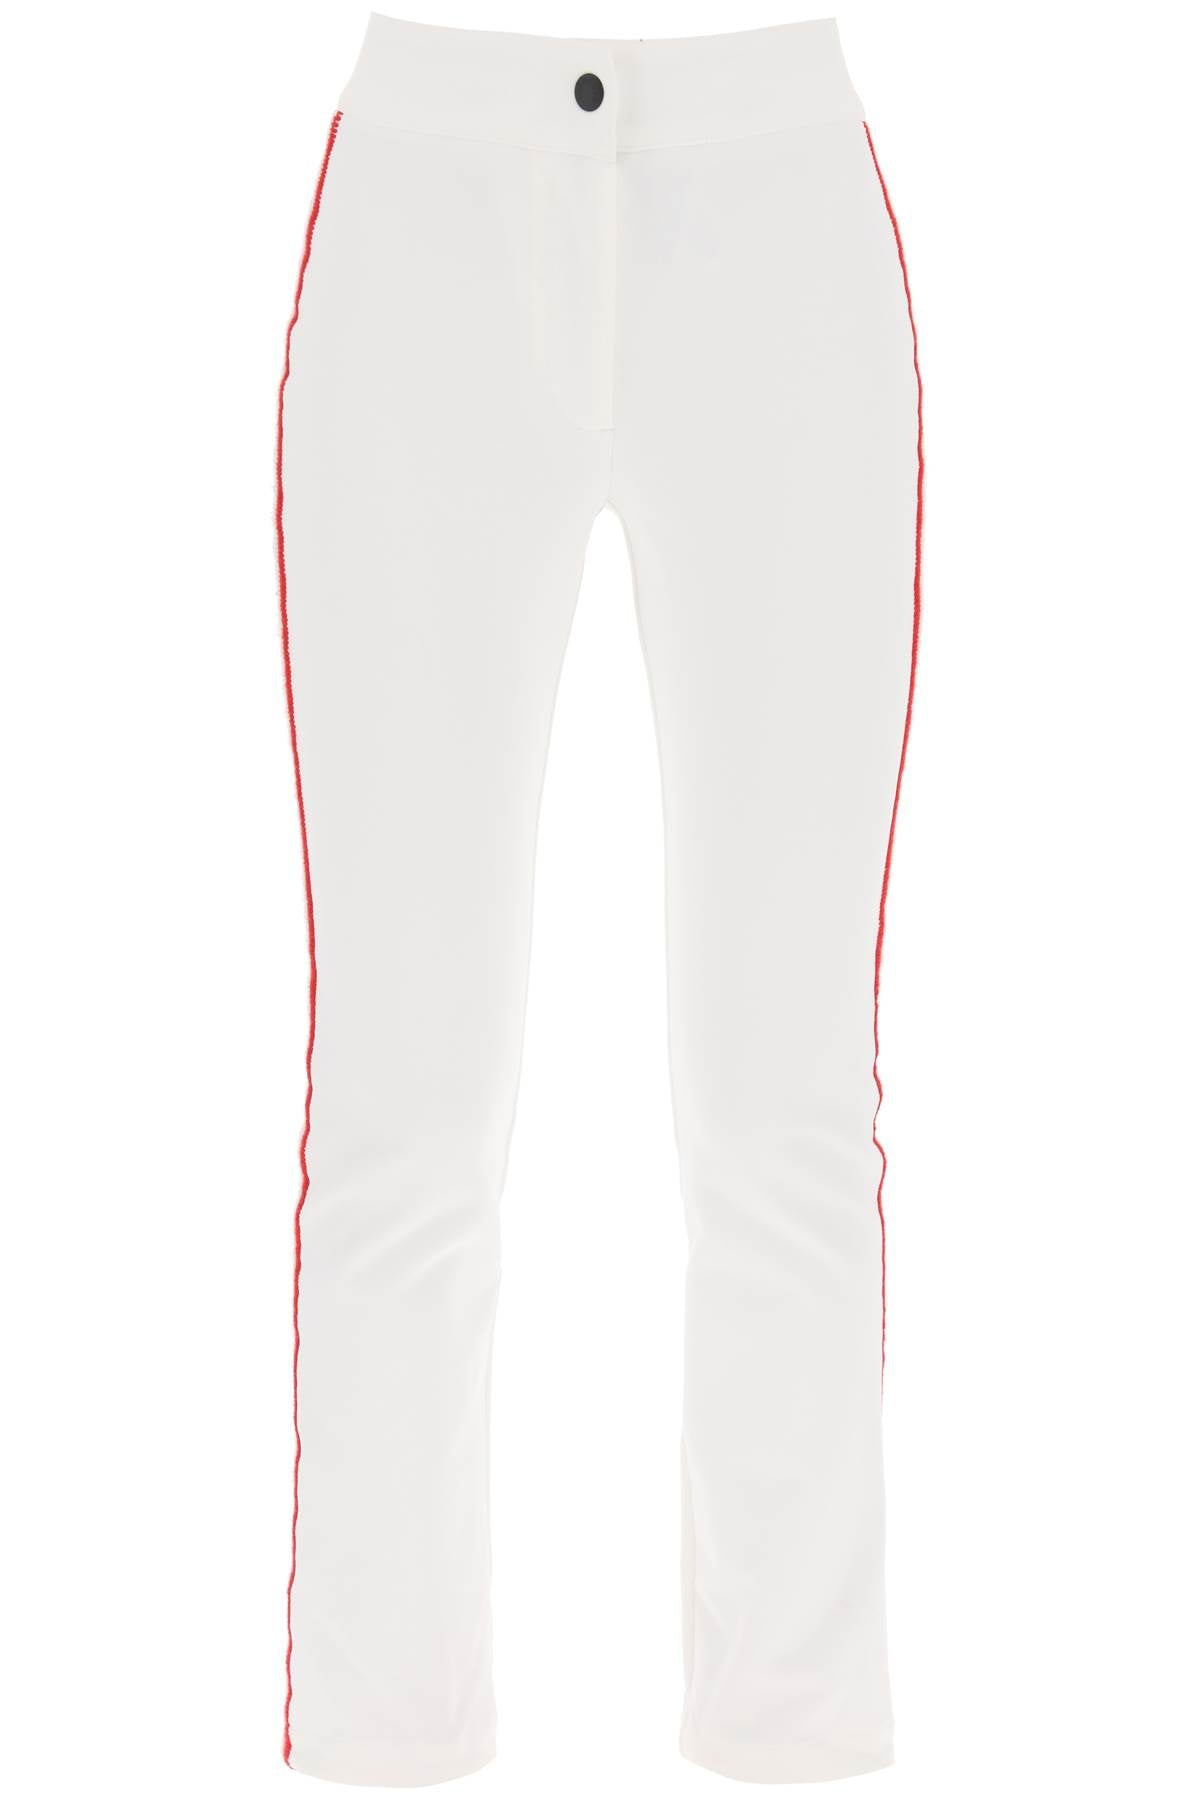 MONCLER GRENOBLE Tricolor Sporty Pants for Women - FW23